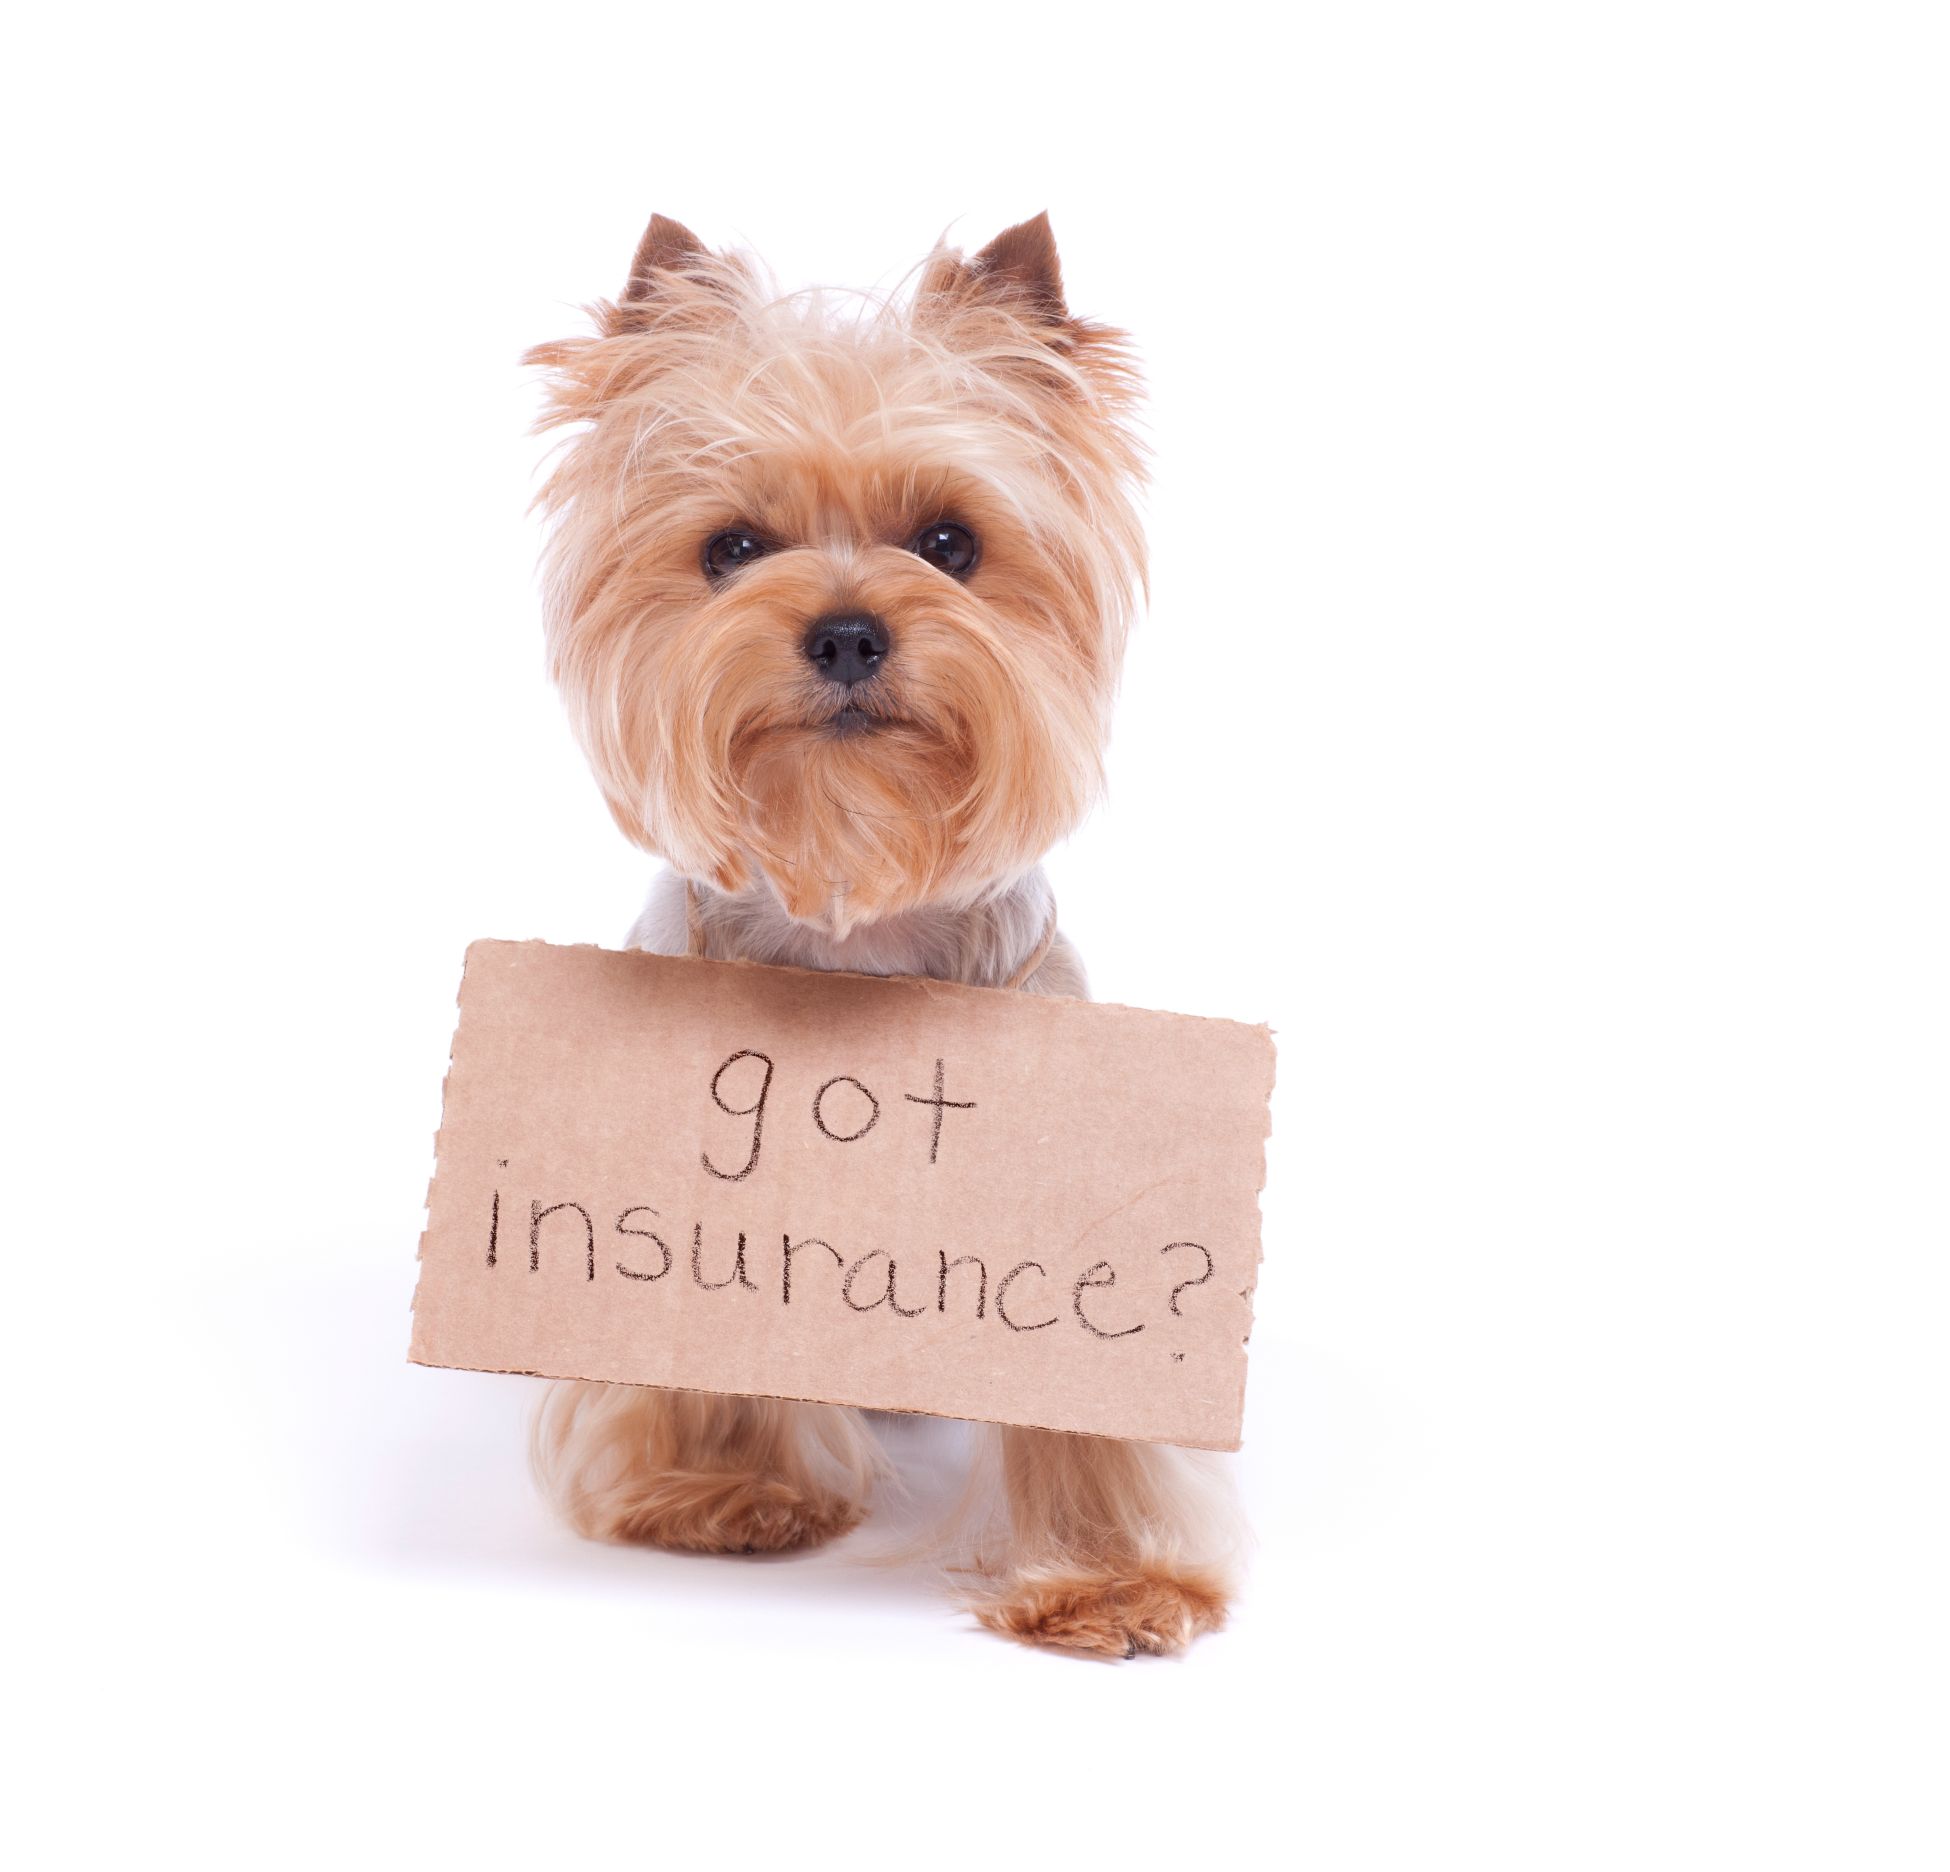 A yorkie holding a sign that says "got insurance?"